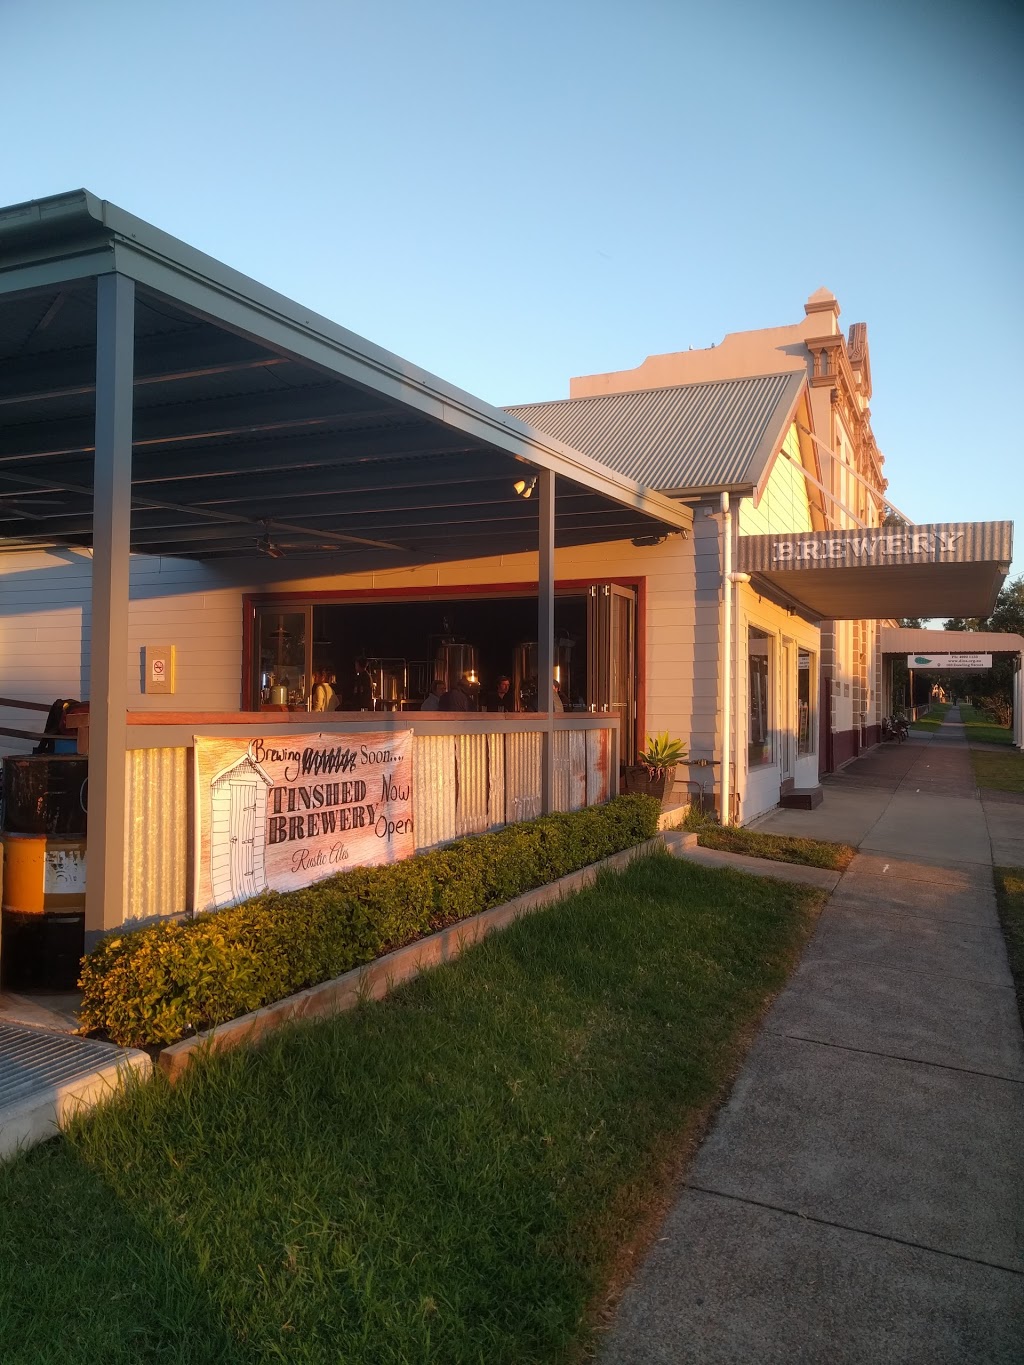 Tinshed Brewery | cafe | 109 Dowling St, Dungog NSW 2420, Australia | 0427652936 OR +61 427 652 936